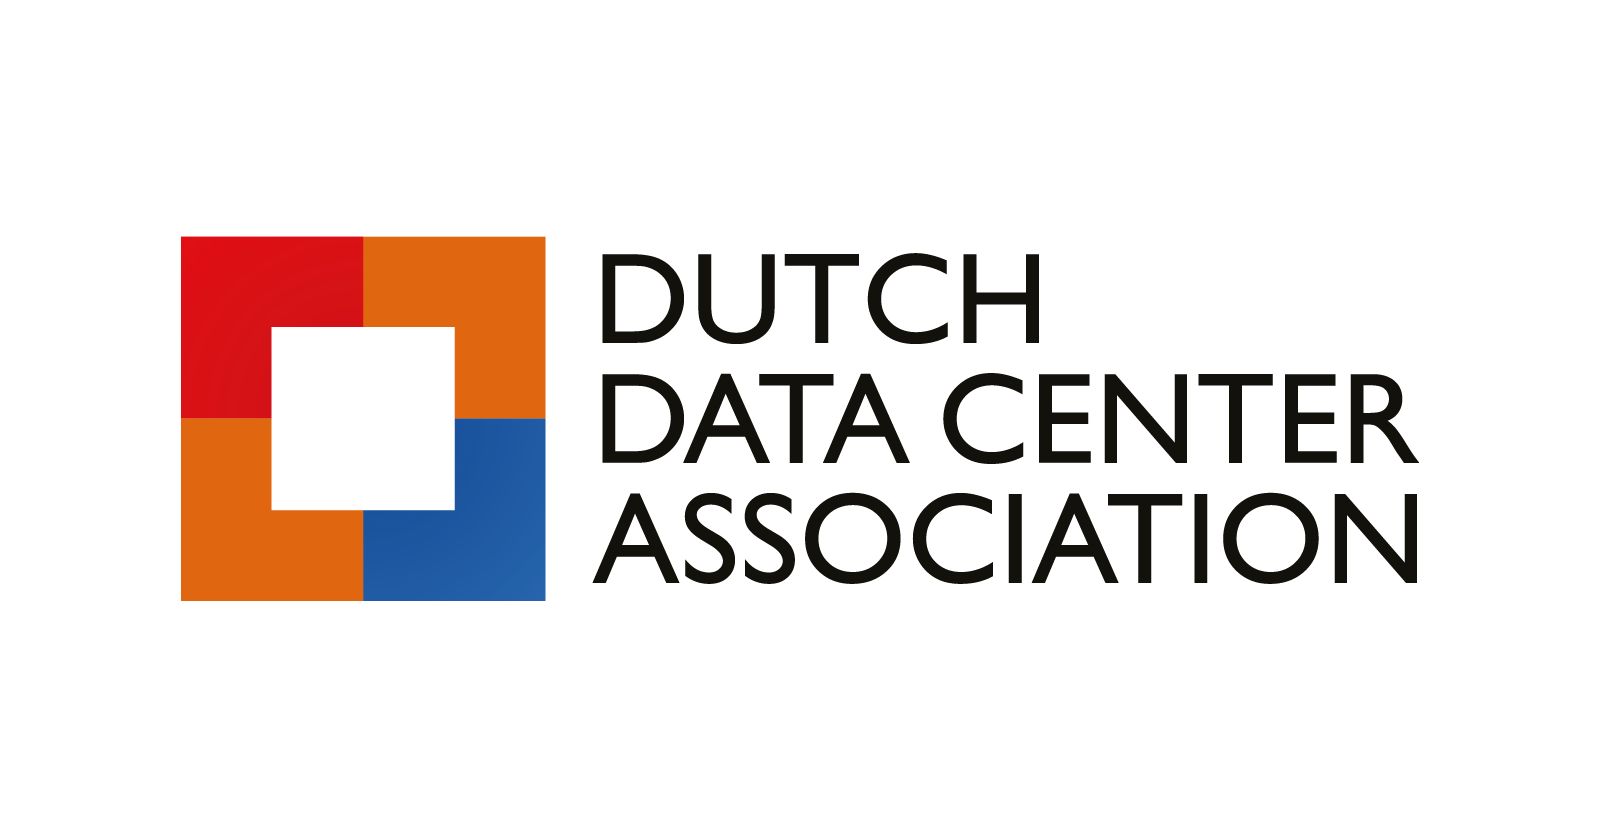 Dutch data centers offer unique look behind the scenes during National Data Center Day